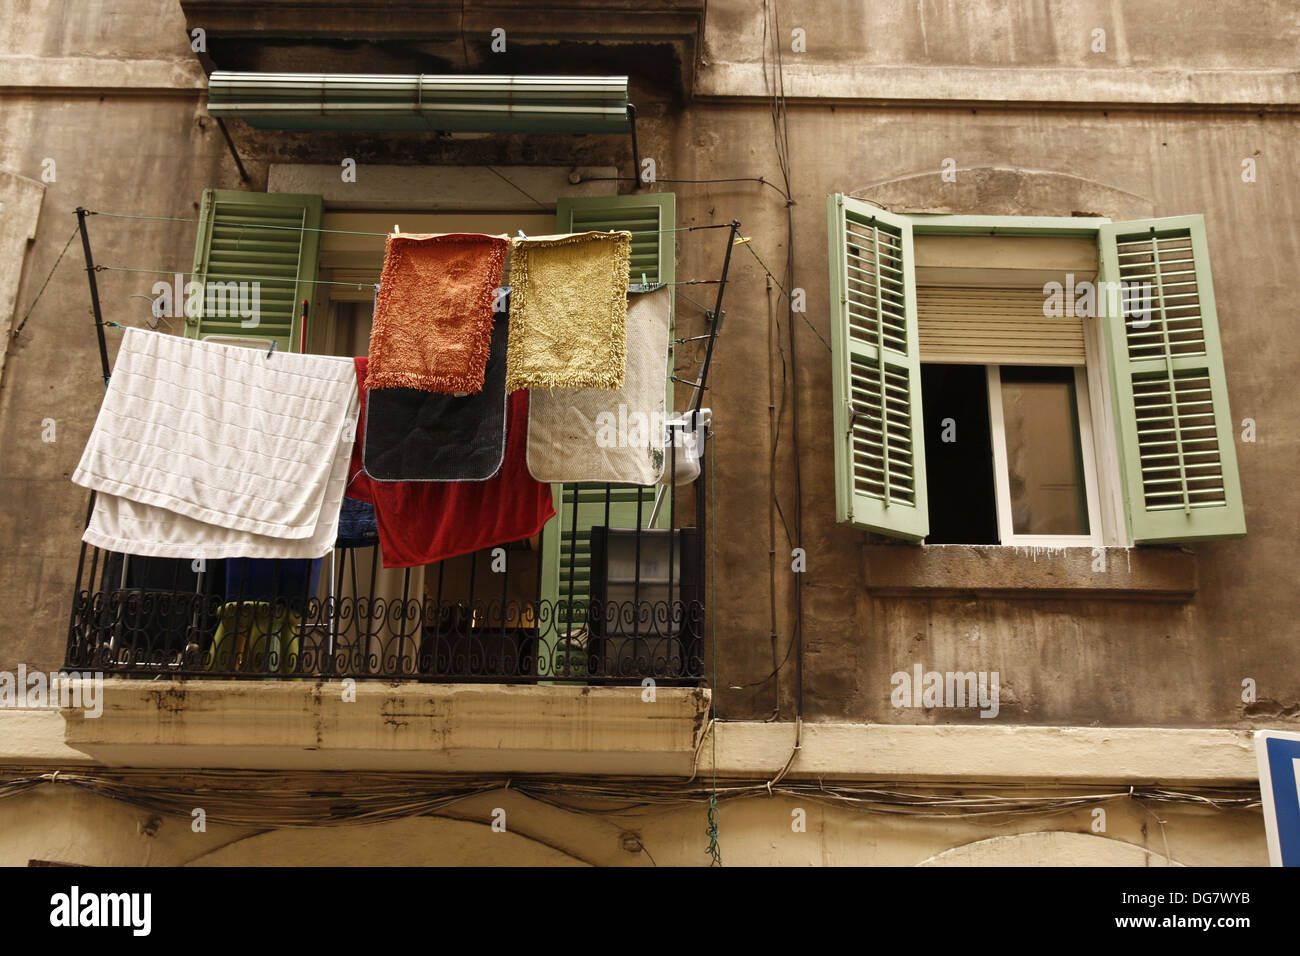 Hanging Clothes Drying Barcelona Spain High Resolution Stock Photography  and Images - Alamy